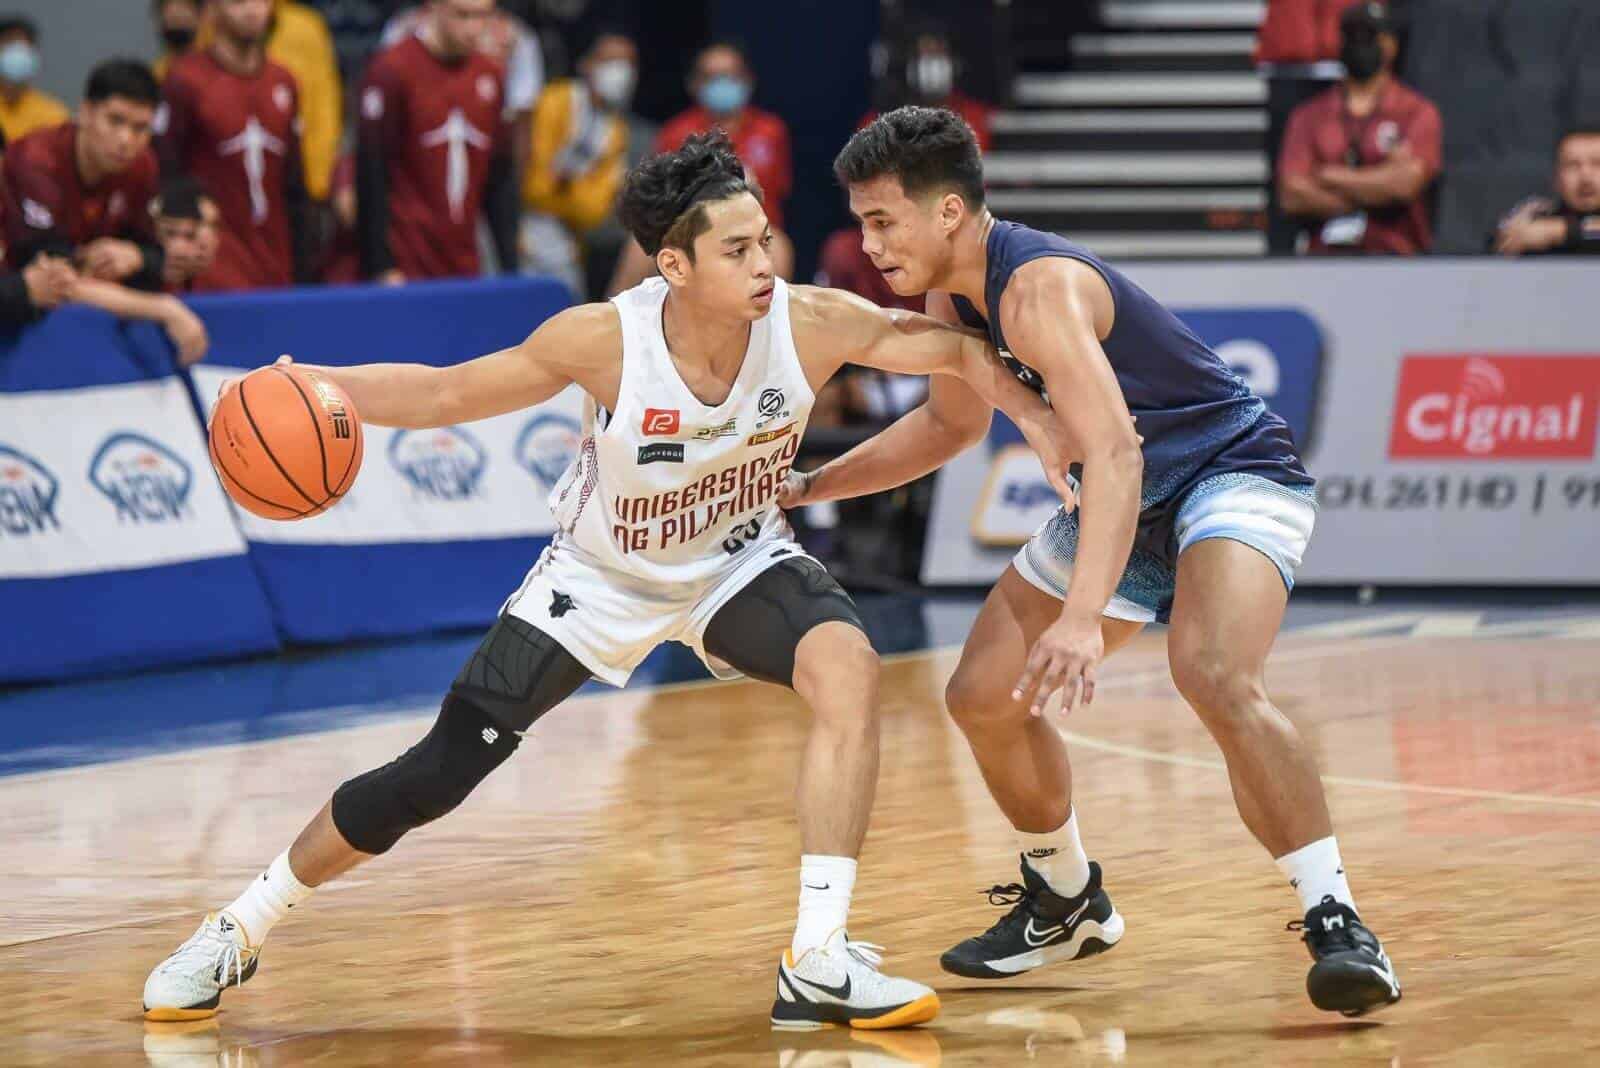 Two basketball players showcase action on the court with a nailbiter win for UP against Adamson.